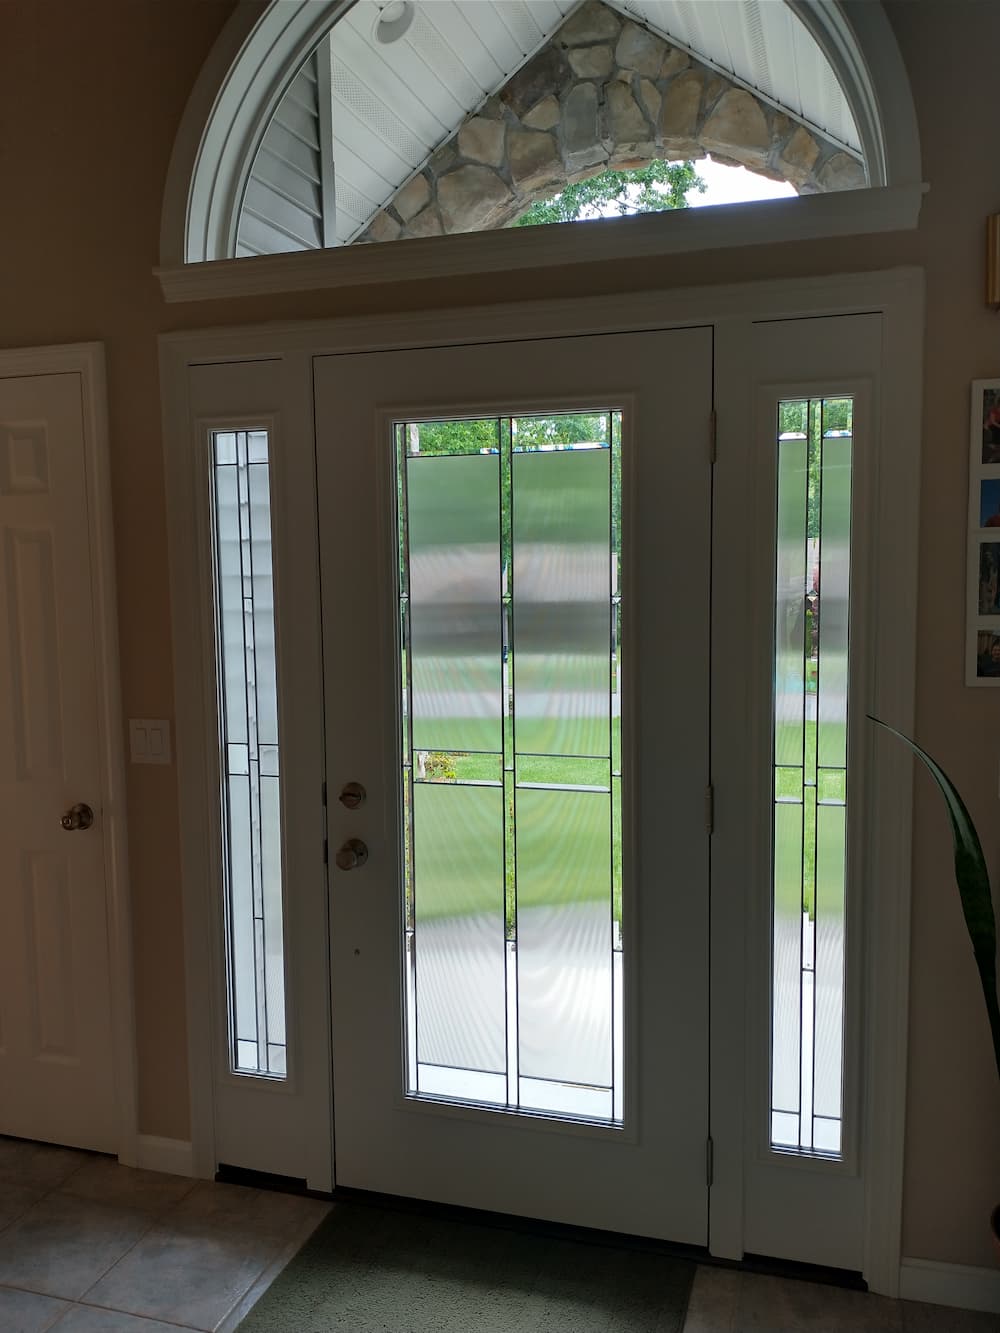 After interior shot of Pella replacement entry door for Ludlow home